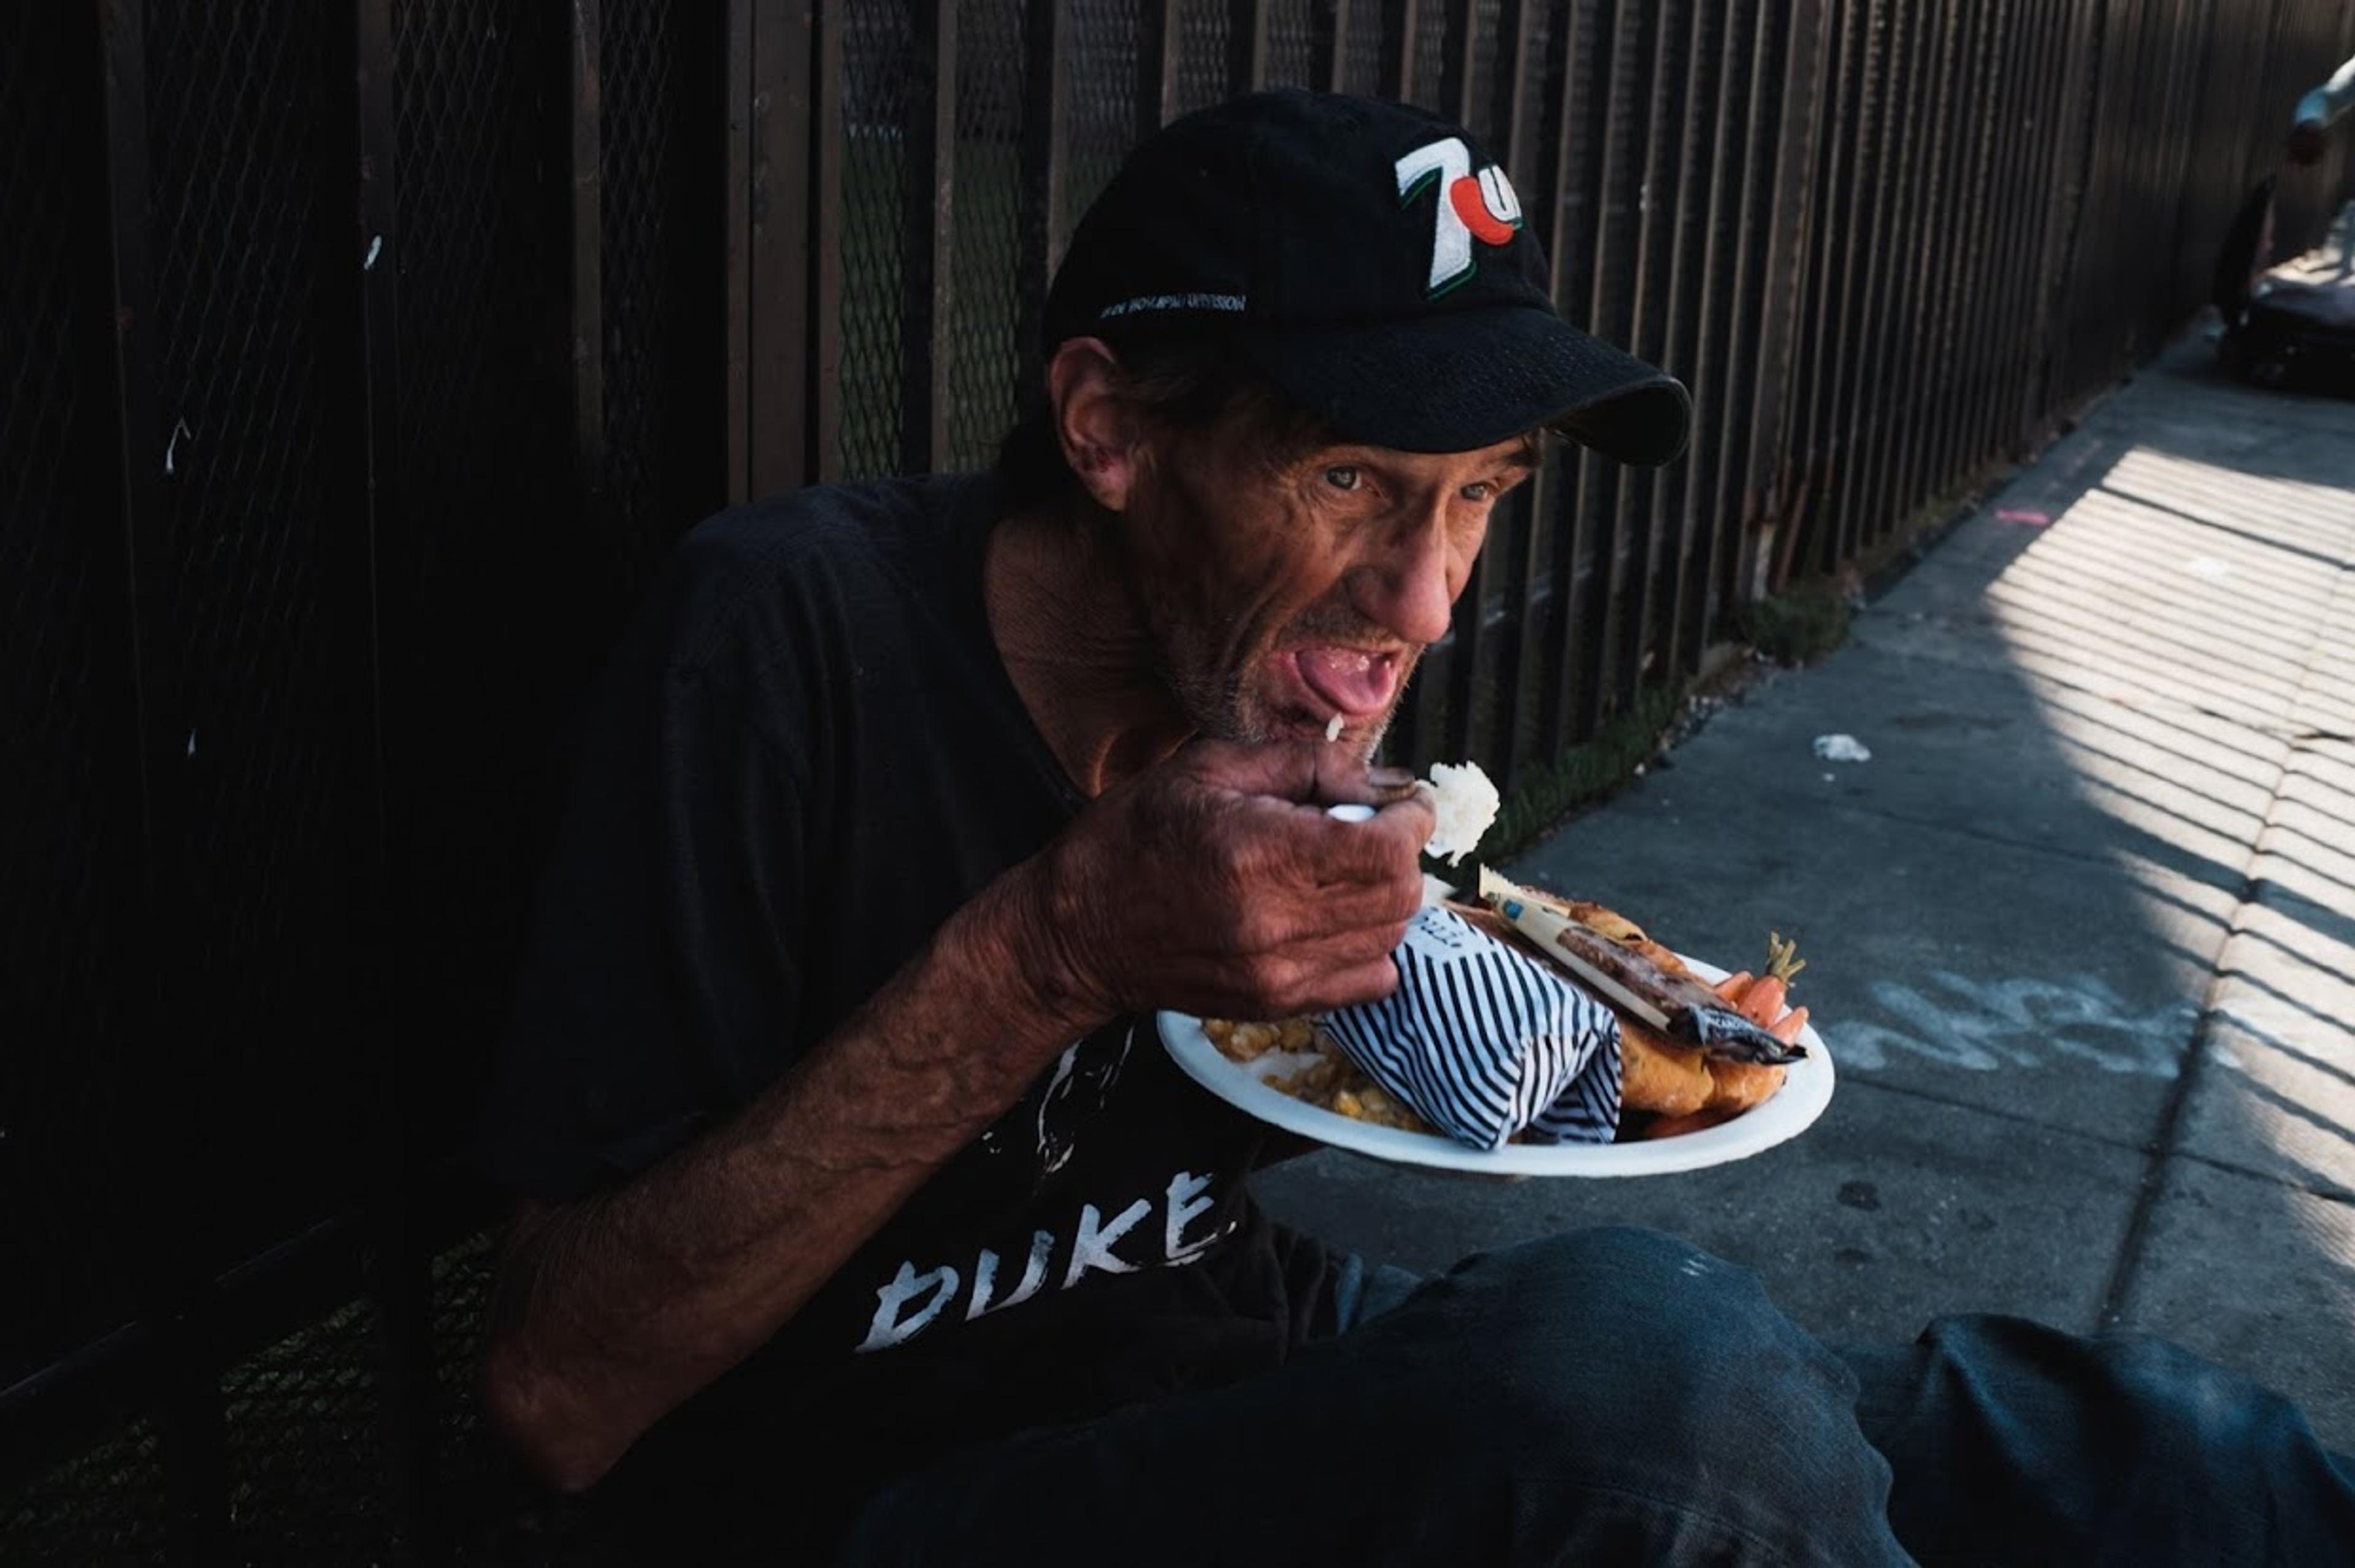 Man receives meal on street